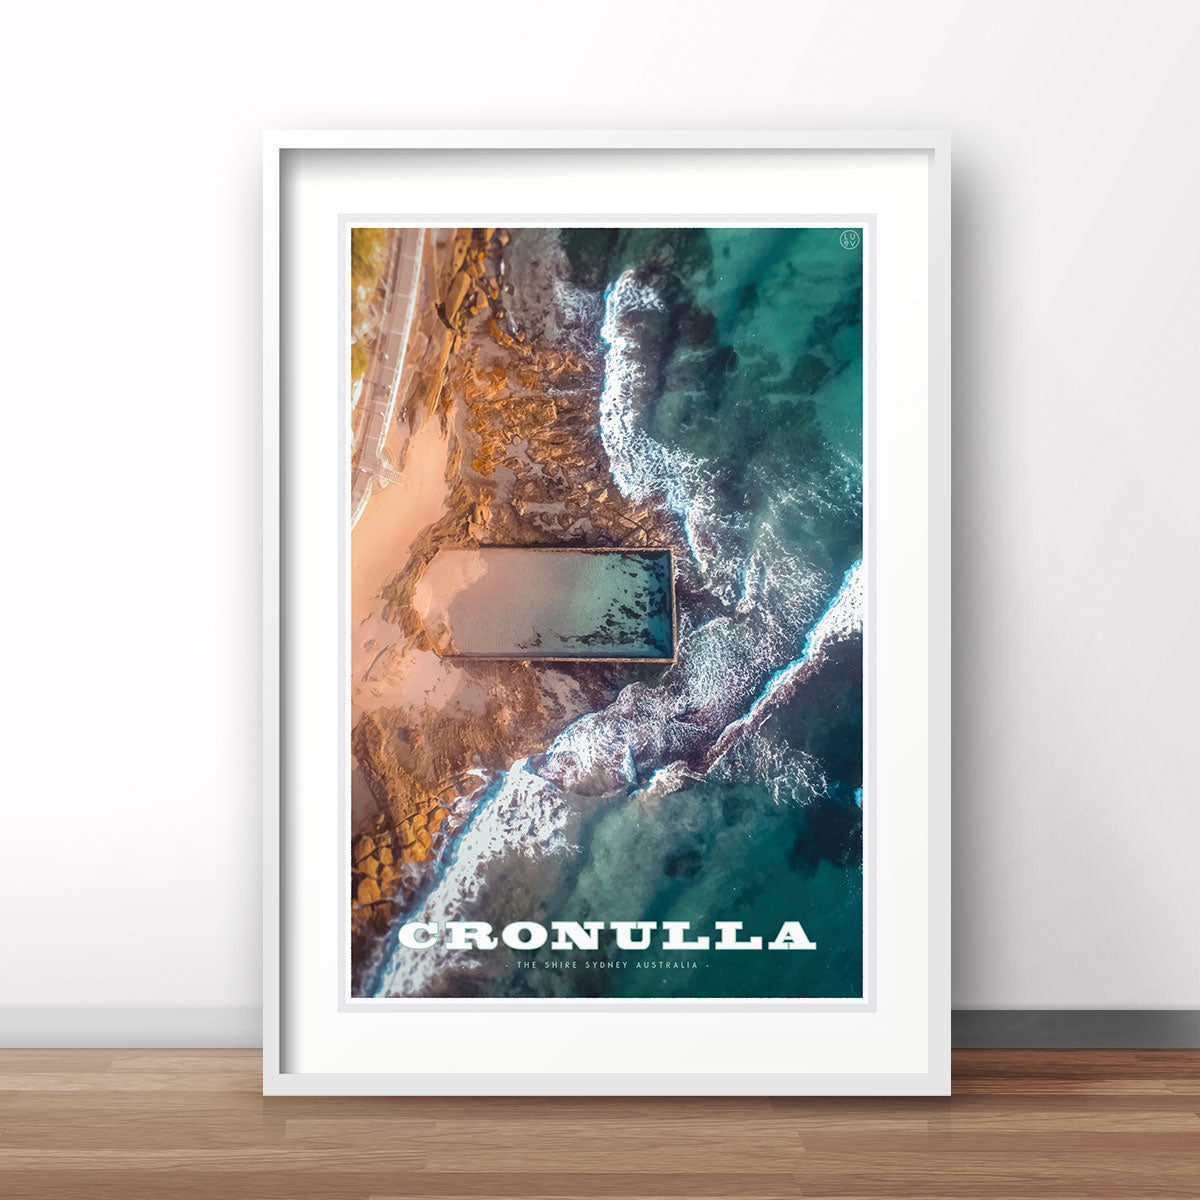 Cremorne pool vintage style framed travel print by Places We Luv